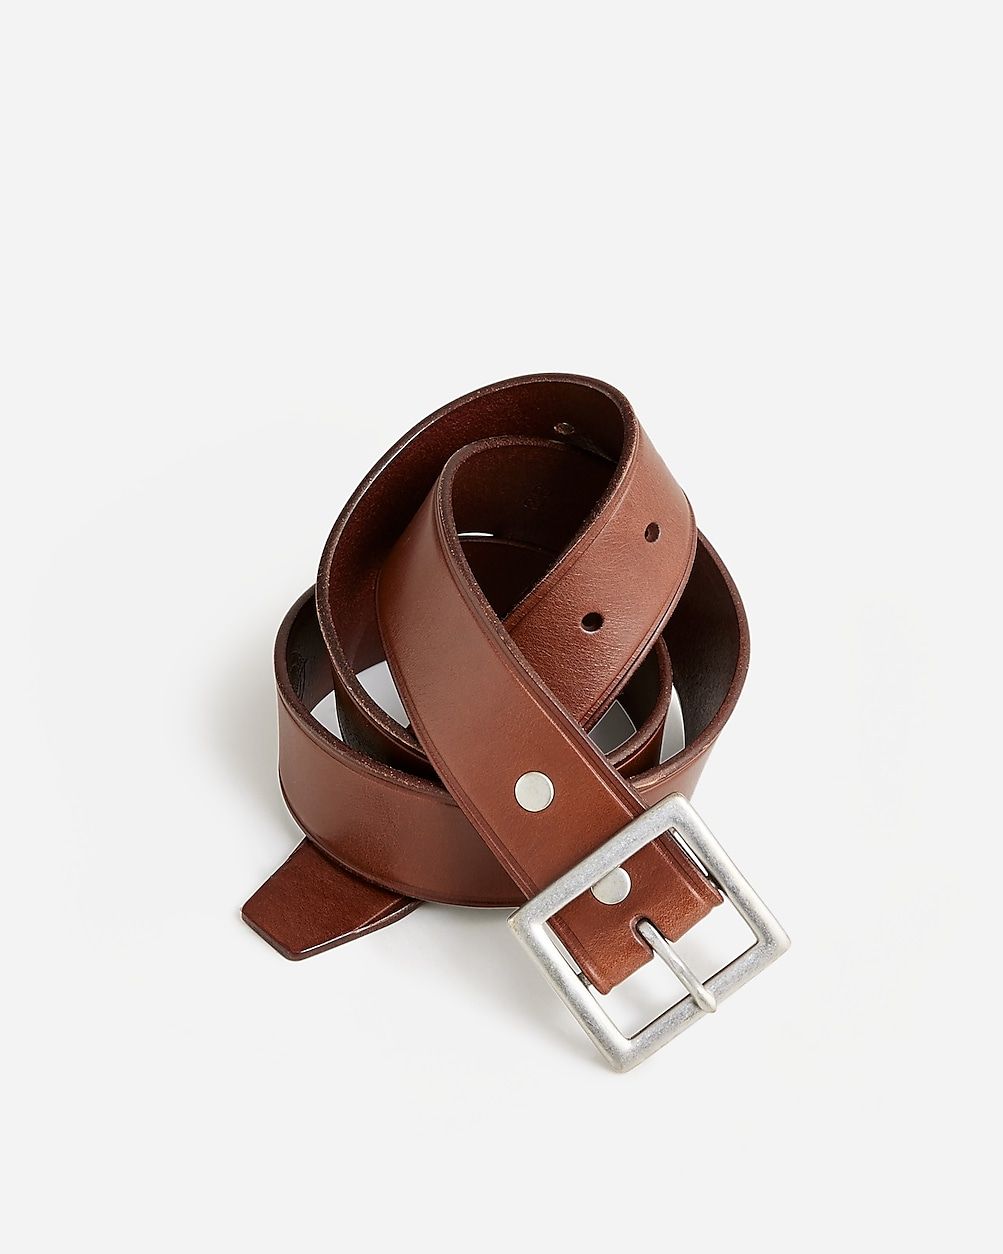 Wallace & Barnes Italian leather belt with square brass buckle | J.Crew US